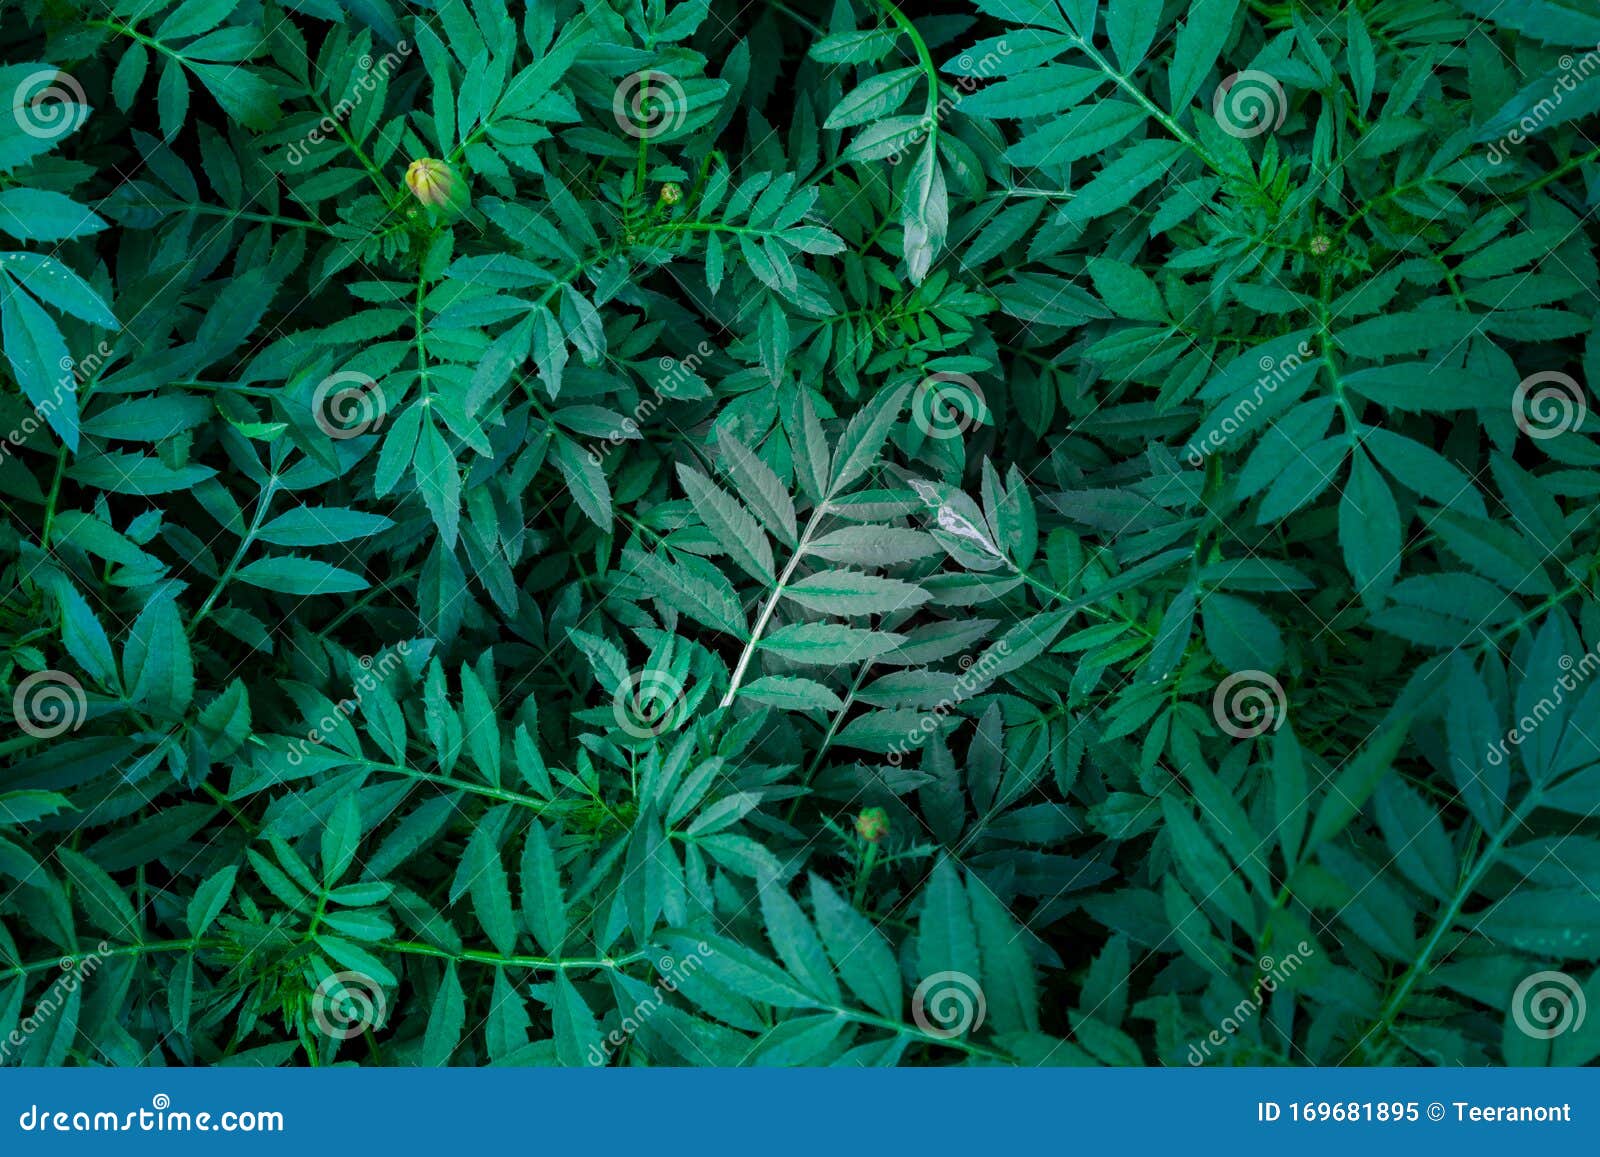 Green Leaf Background Photo Use Design To Wallpaper or Backdrop Stock